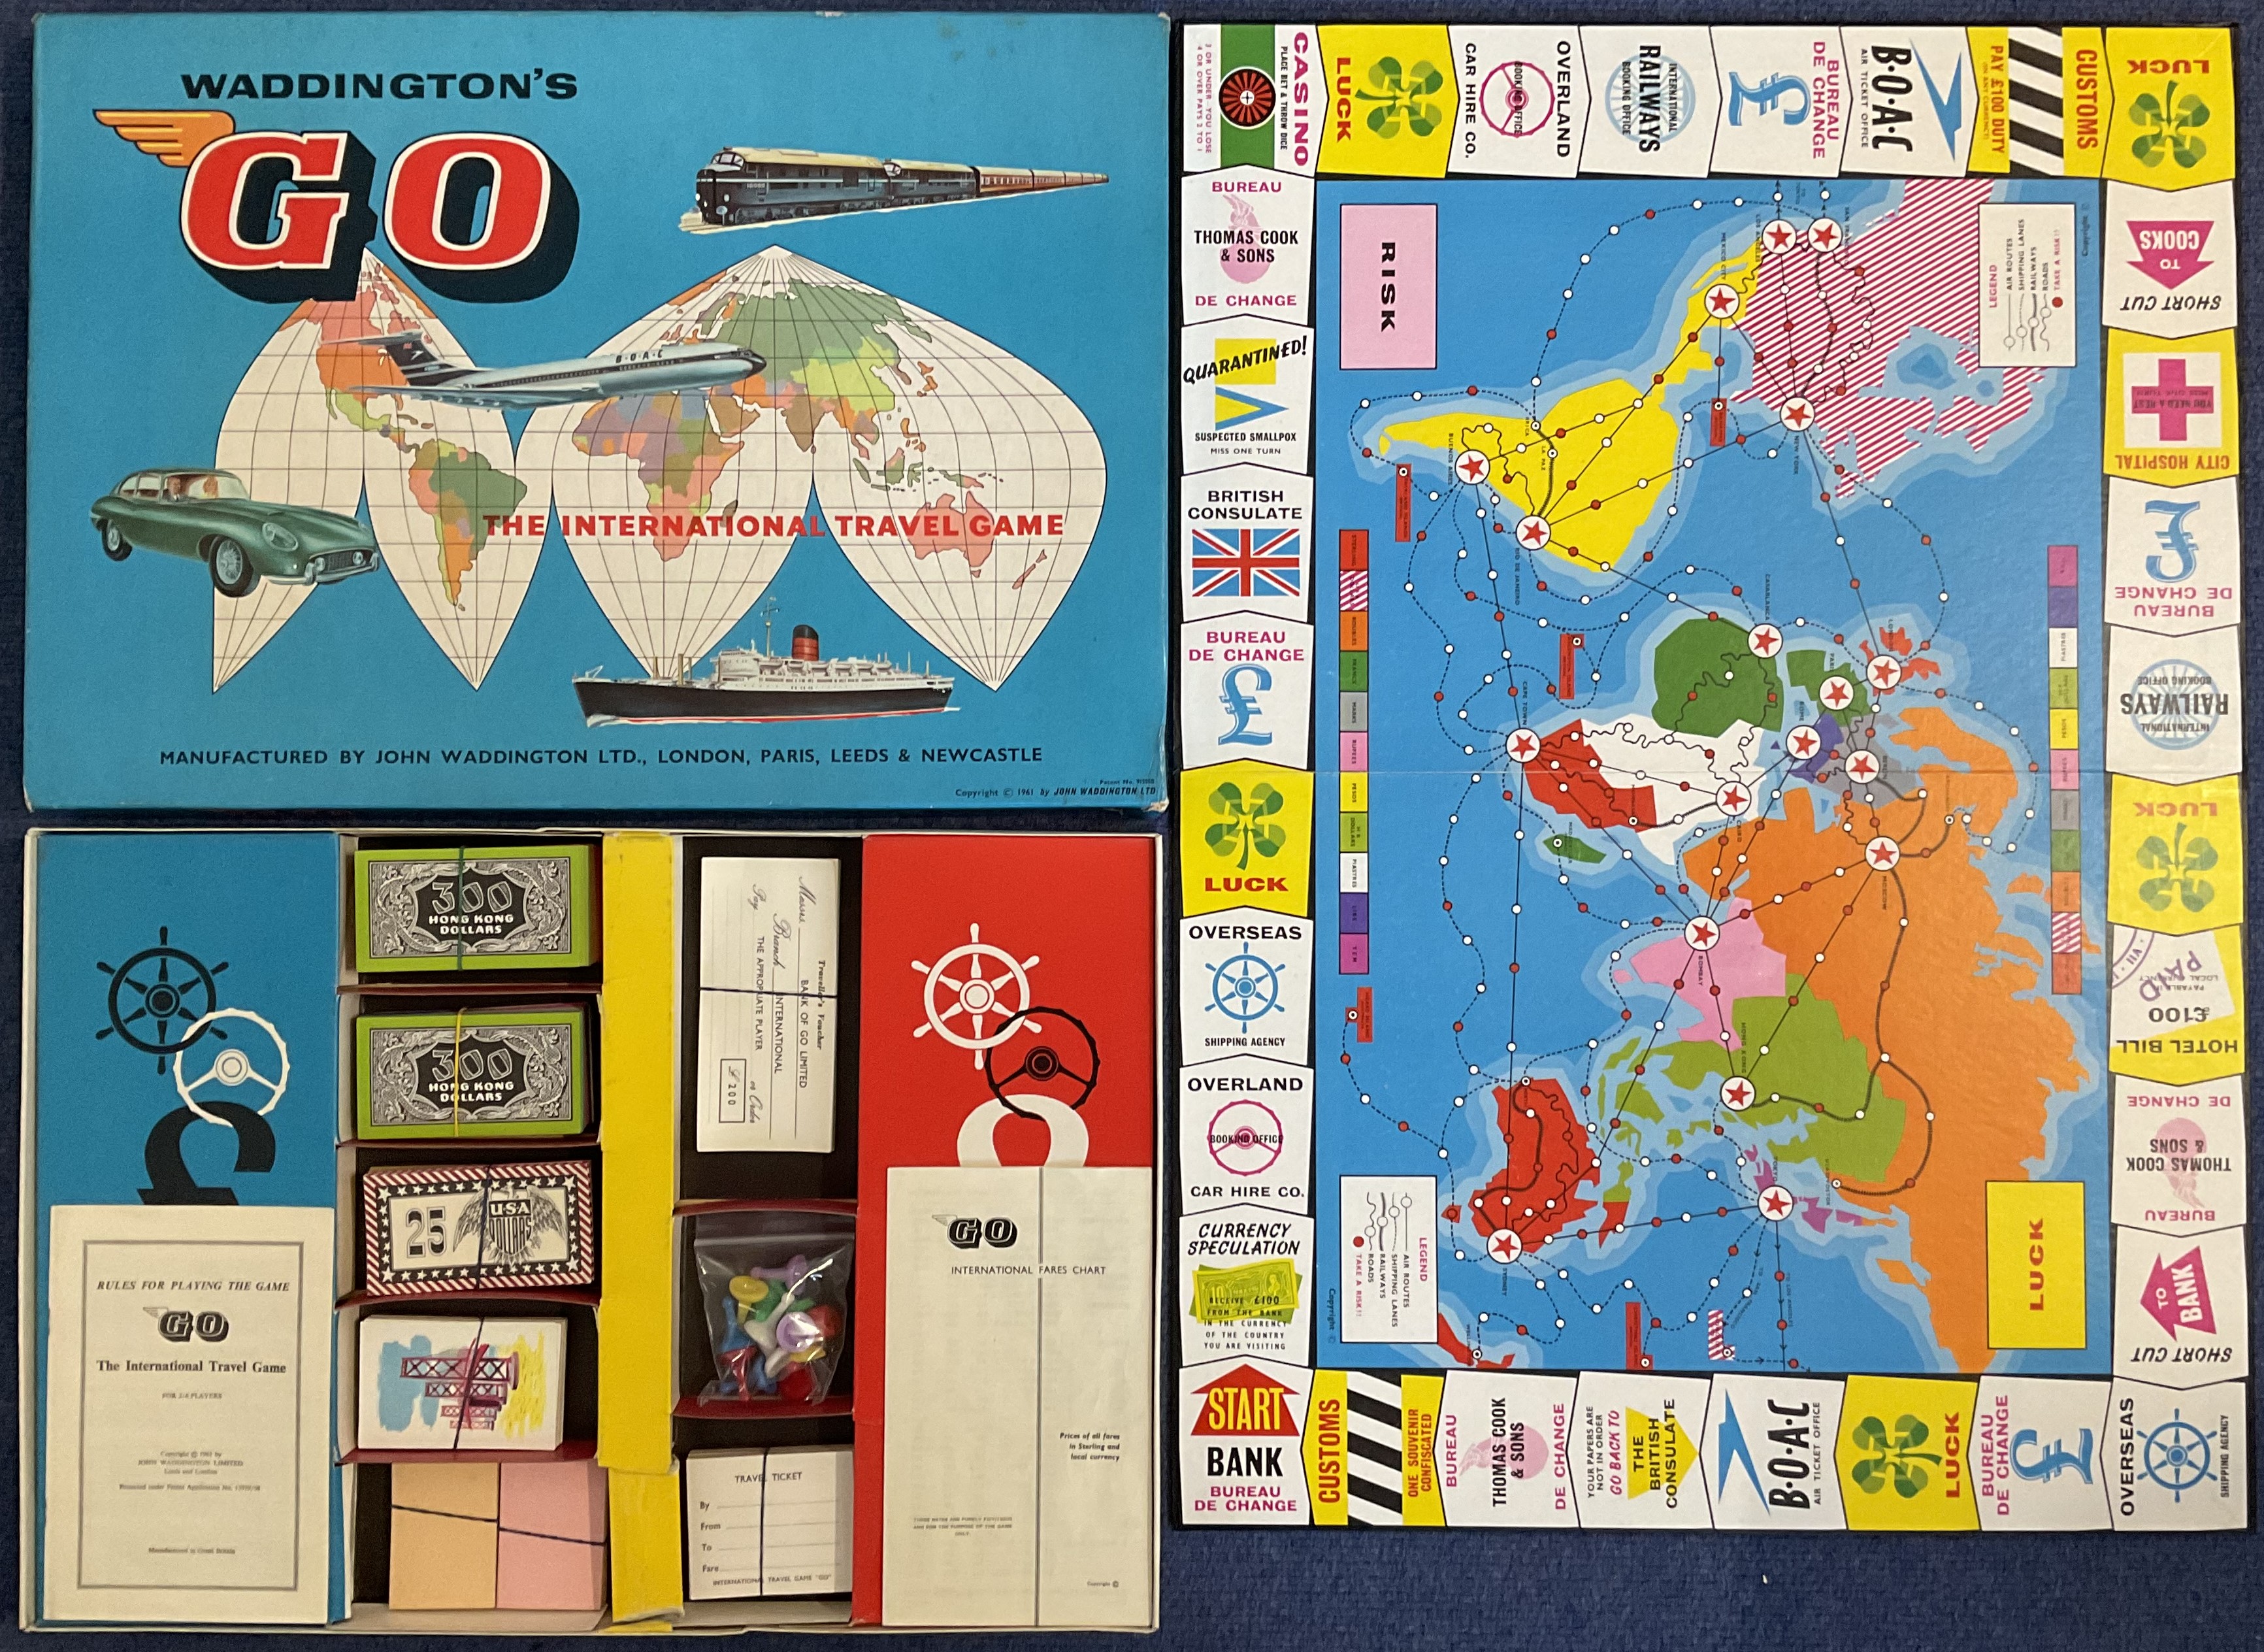 Go The International Travel Game by John Waddington Ltd 1961, for 2 to 6 players appears to be